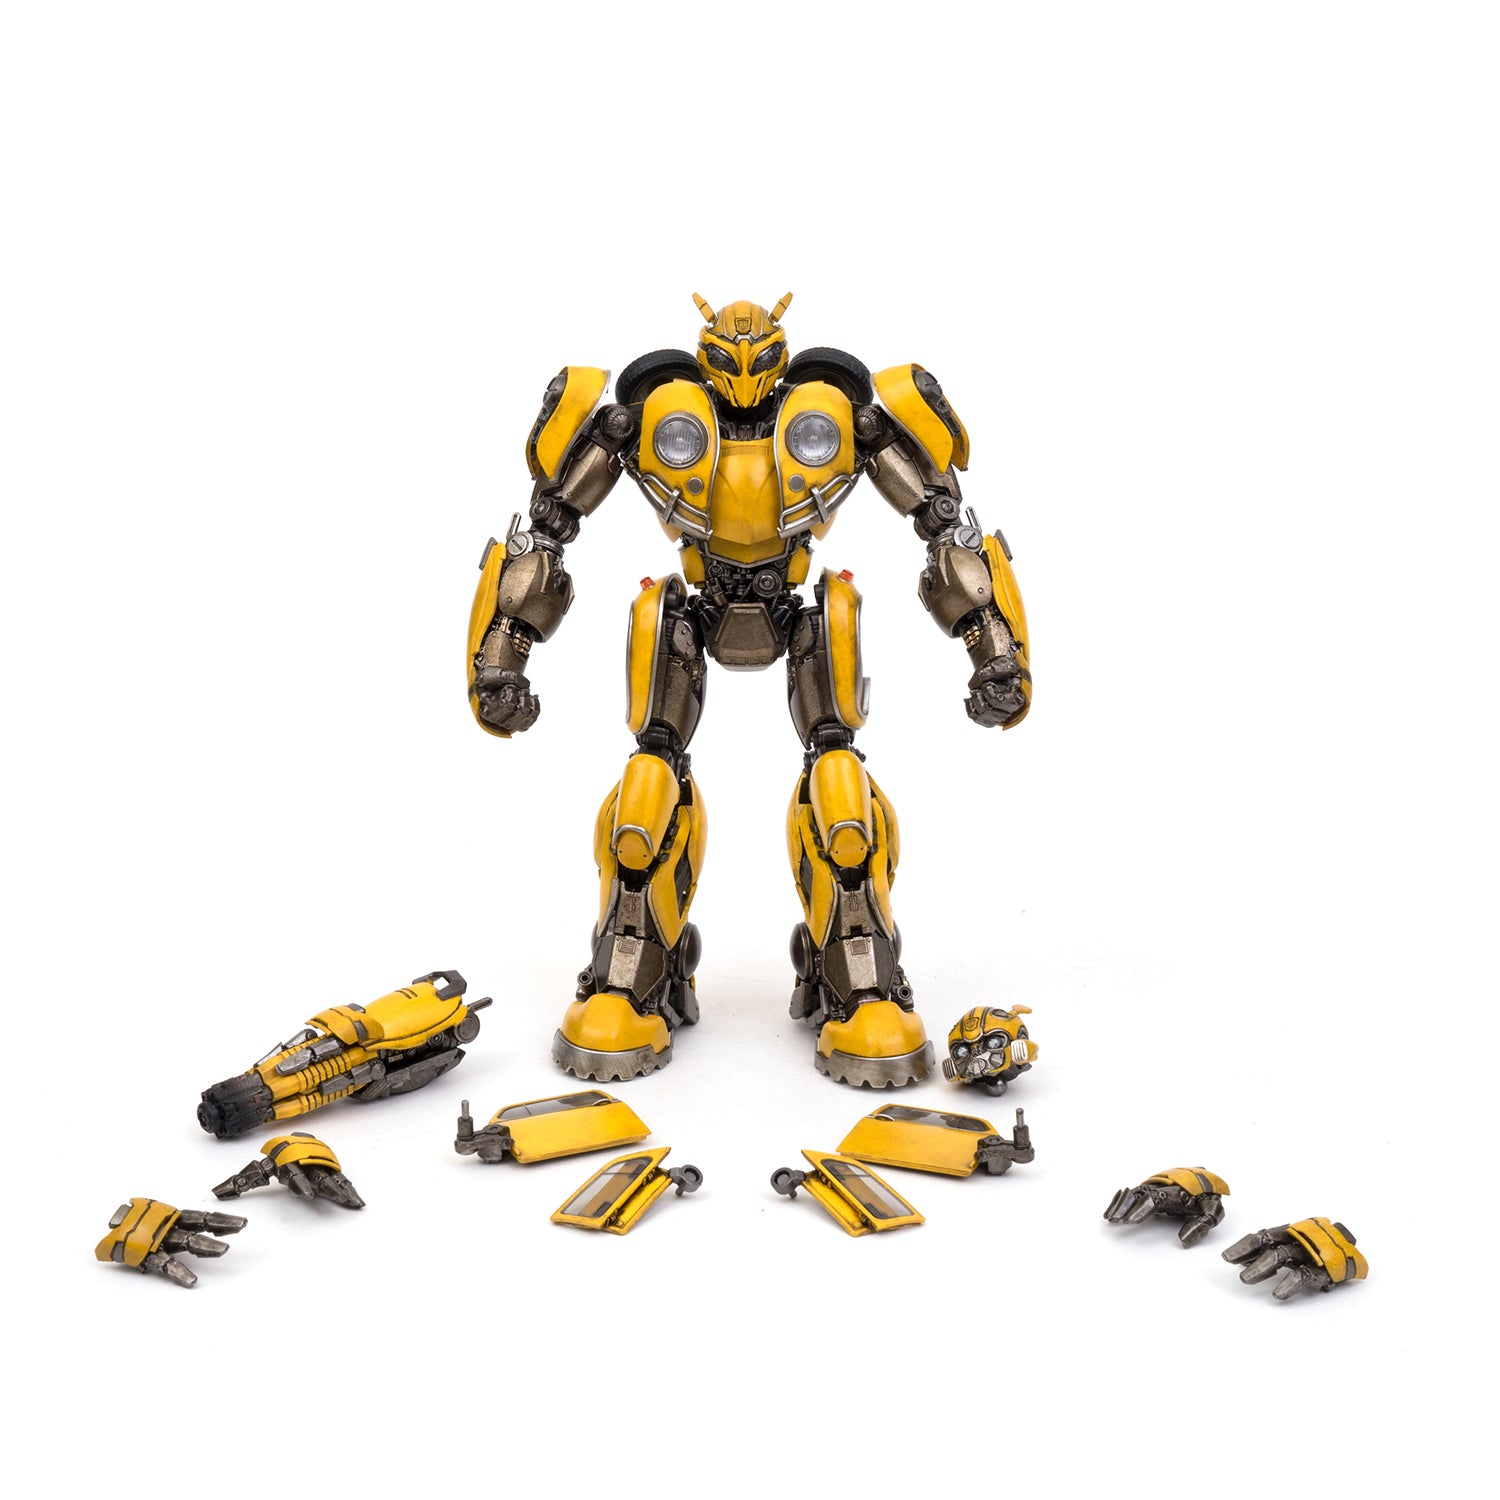 transformers bumblebee dlx scale